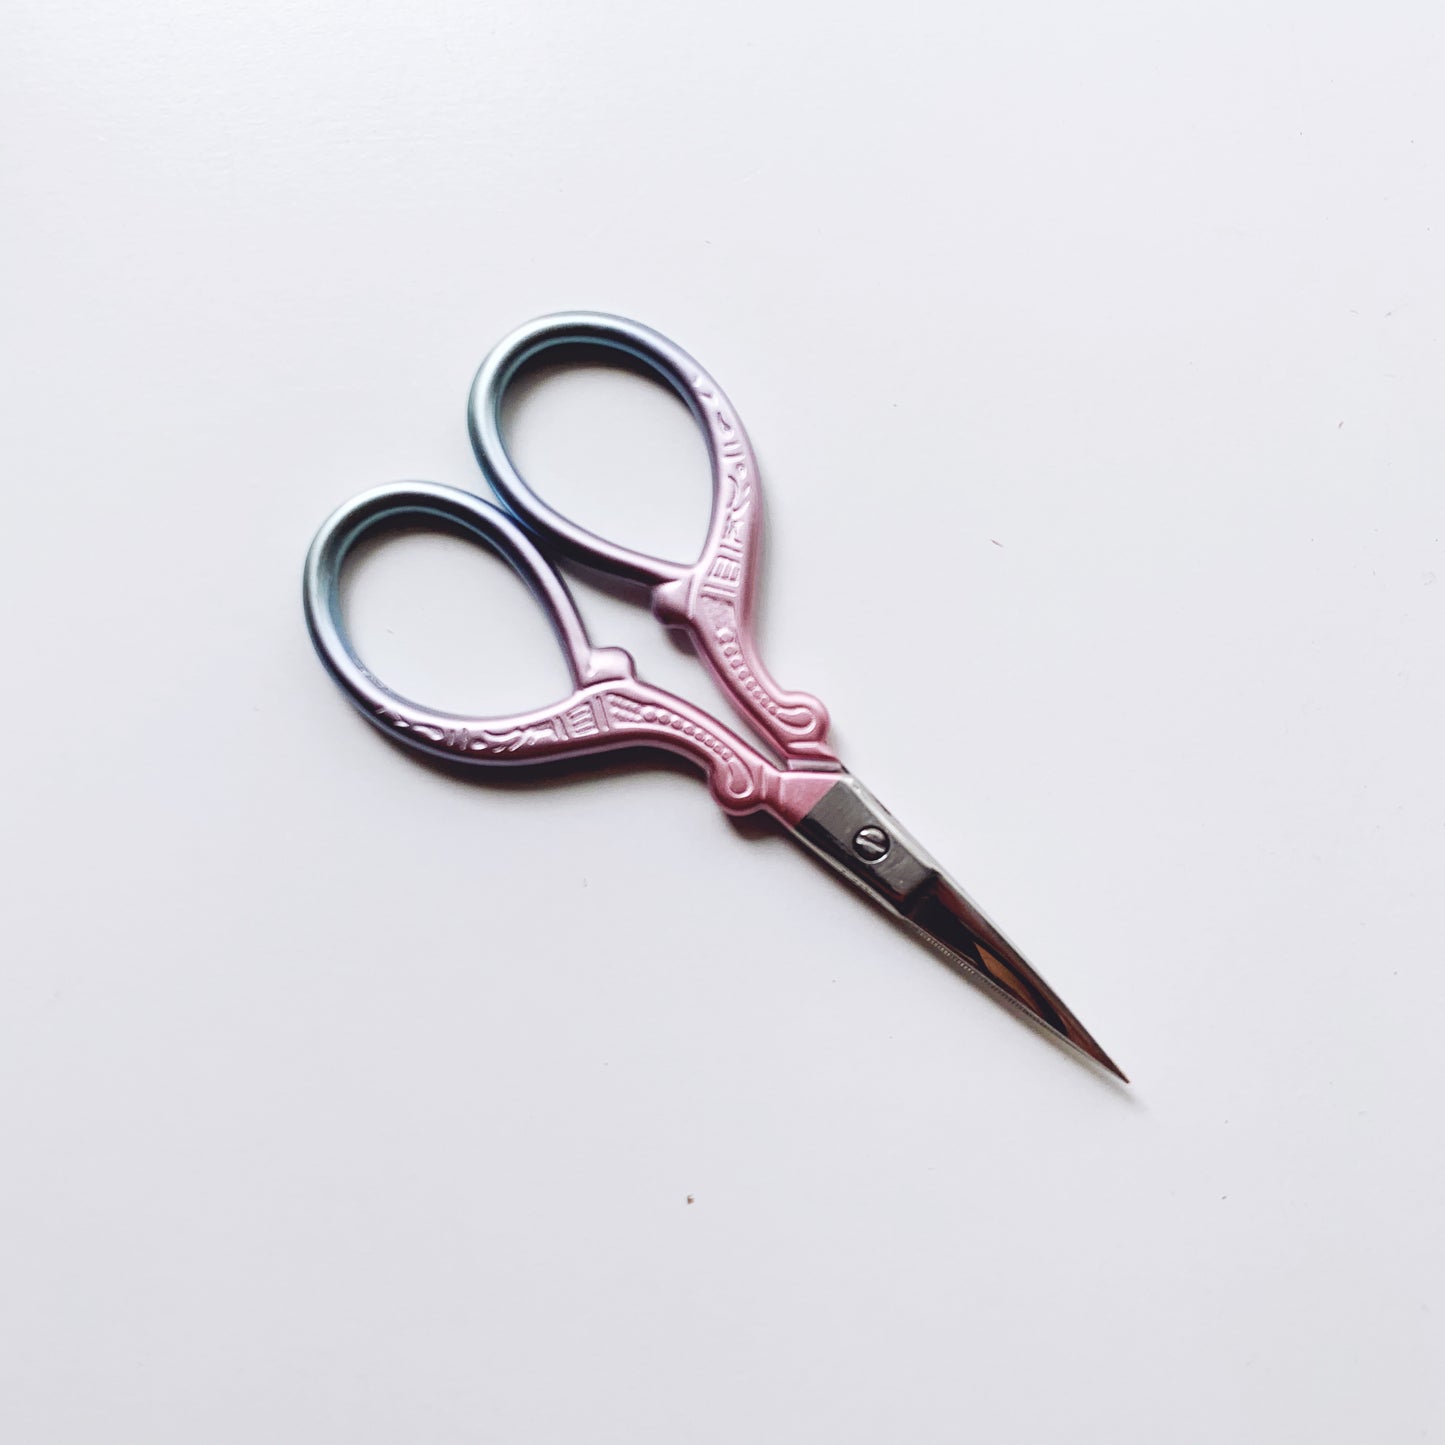 Leyah Antique Style Vintage Cotton Candy Stainless Steel Embroidery Scissors